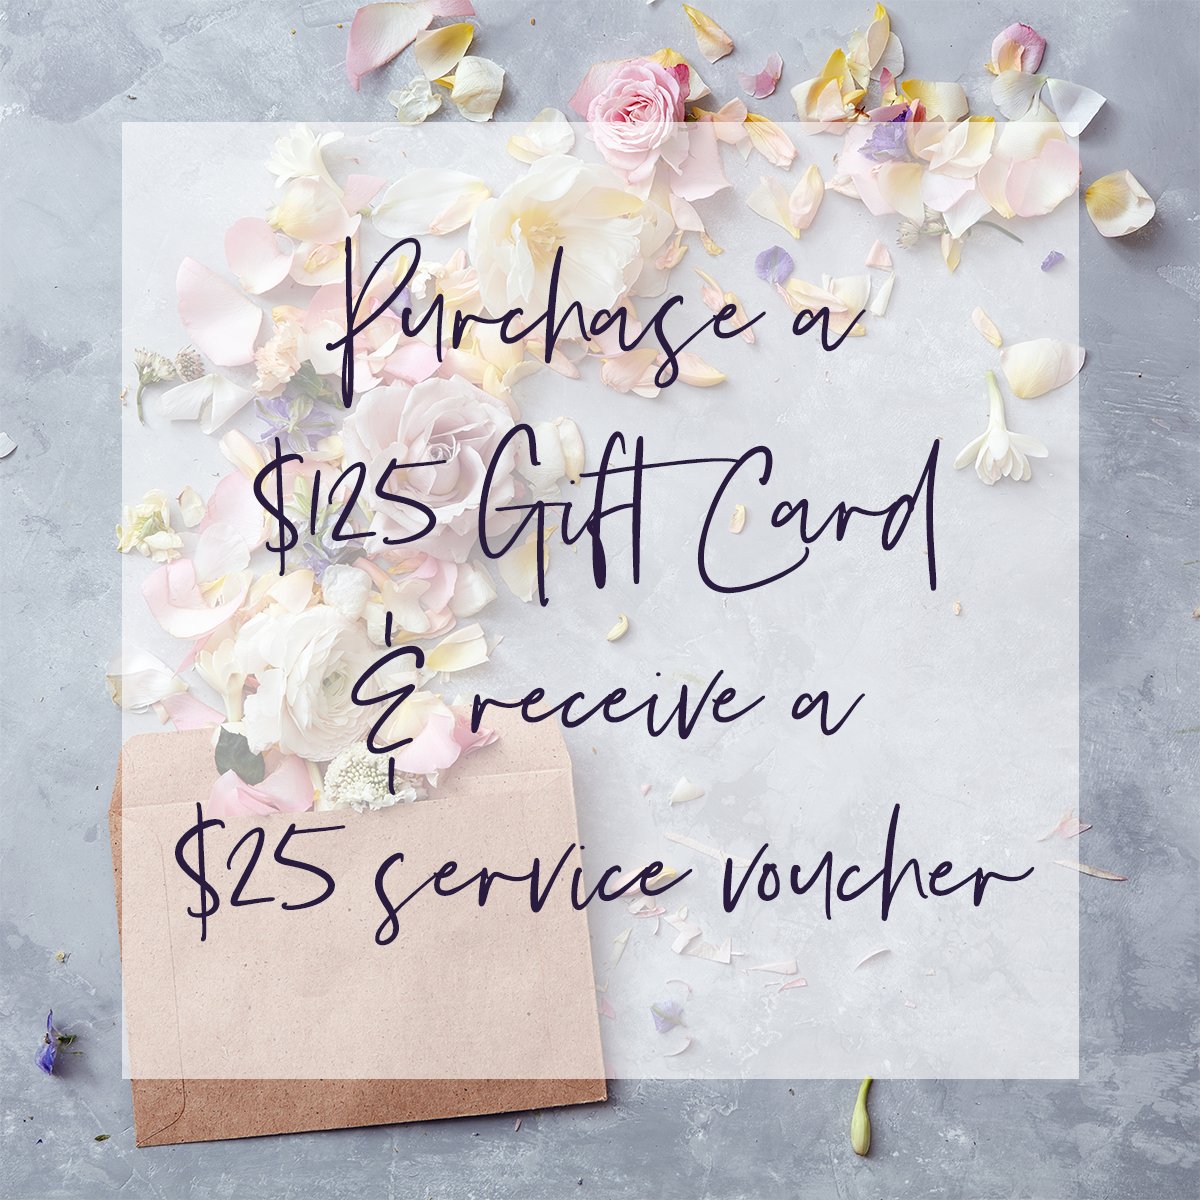 Purchase a $125 #giftcard and receive a $25 service voucher! #mothersday #mothersday2018 #fivesensespeoria #fivesensespa #fivesensessalon #mothers #mom #celebratemom #giftcards #gift #present #special #instalike #instalove #momsoninsta #momsoninstagram #peoriail